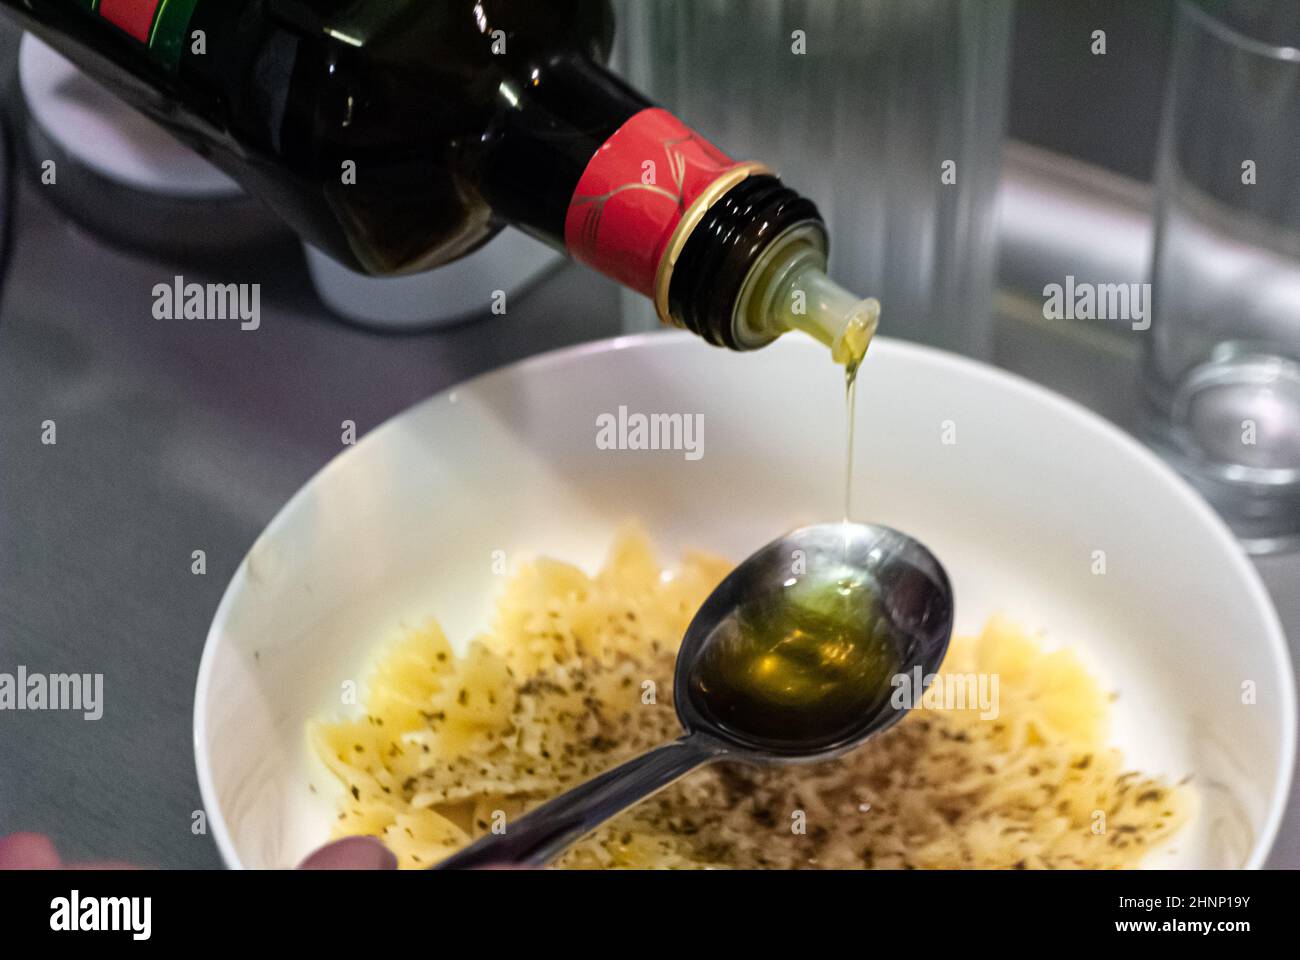 Olive oil pours into a spoon against the background of a bowl with pasta Stock Photo